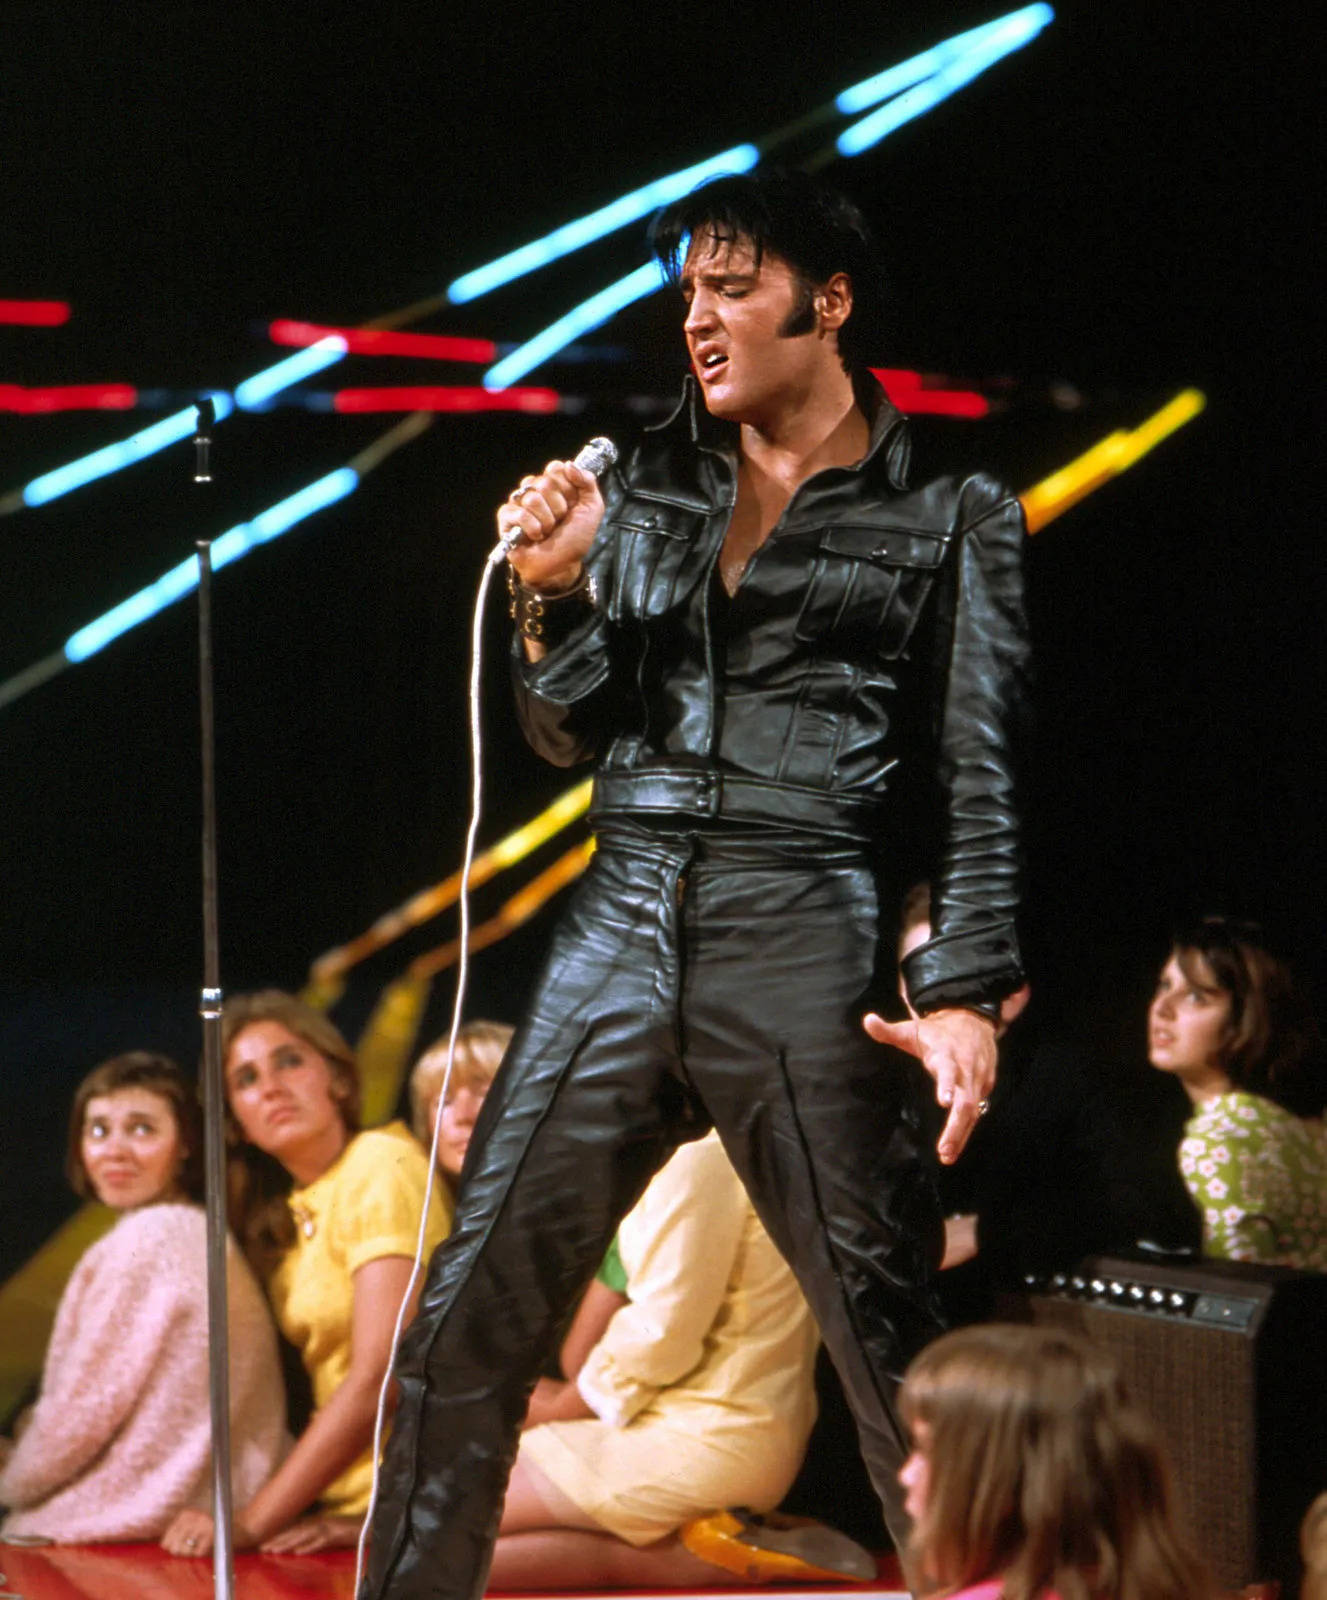 Elvis Presley In Leather Attire